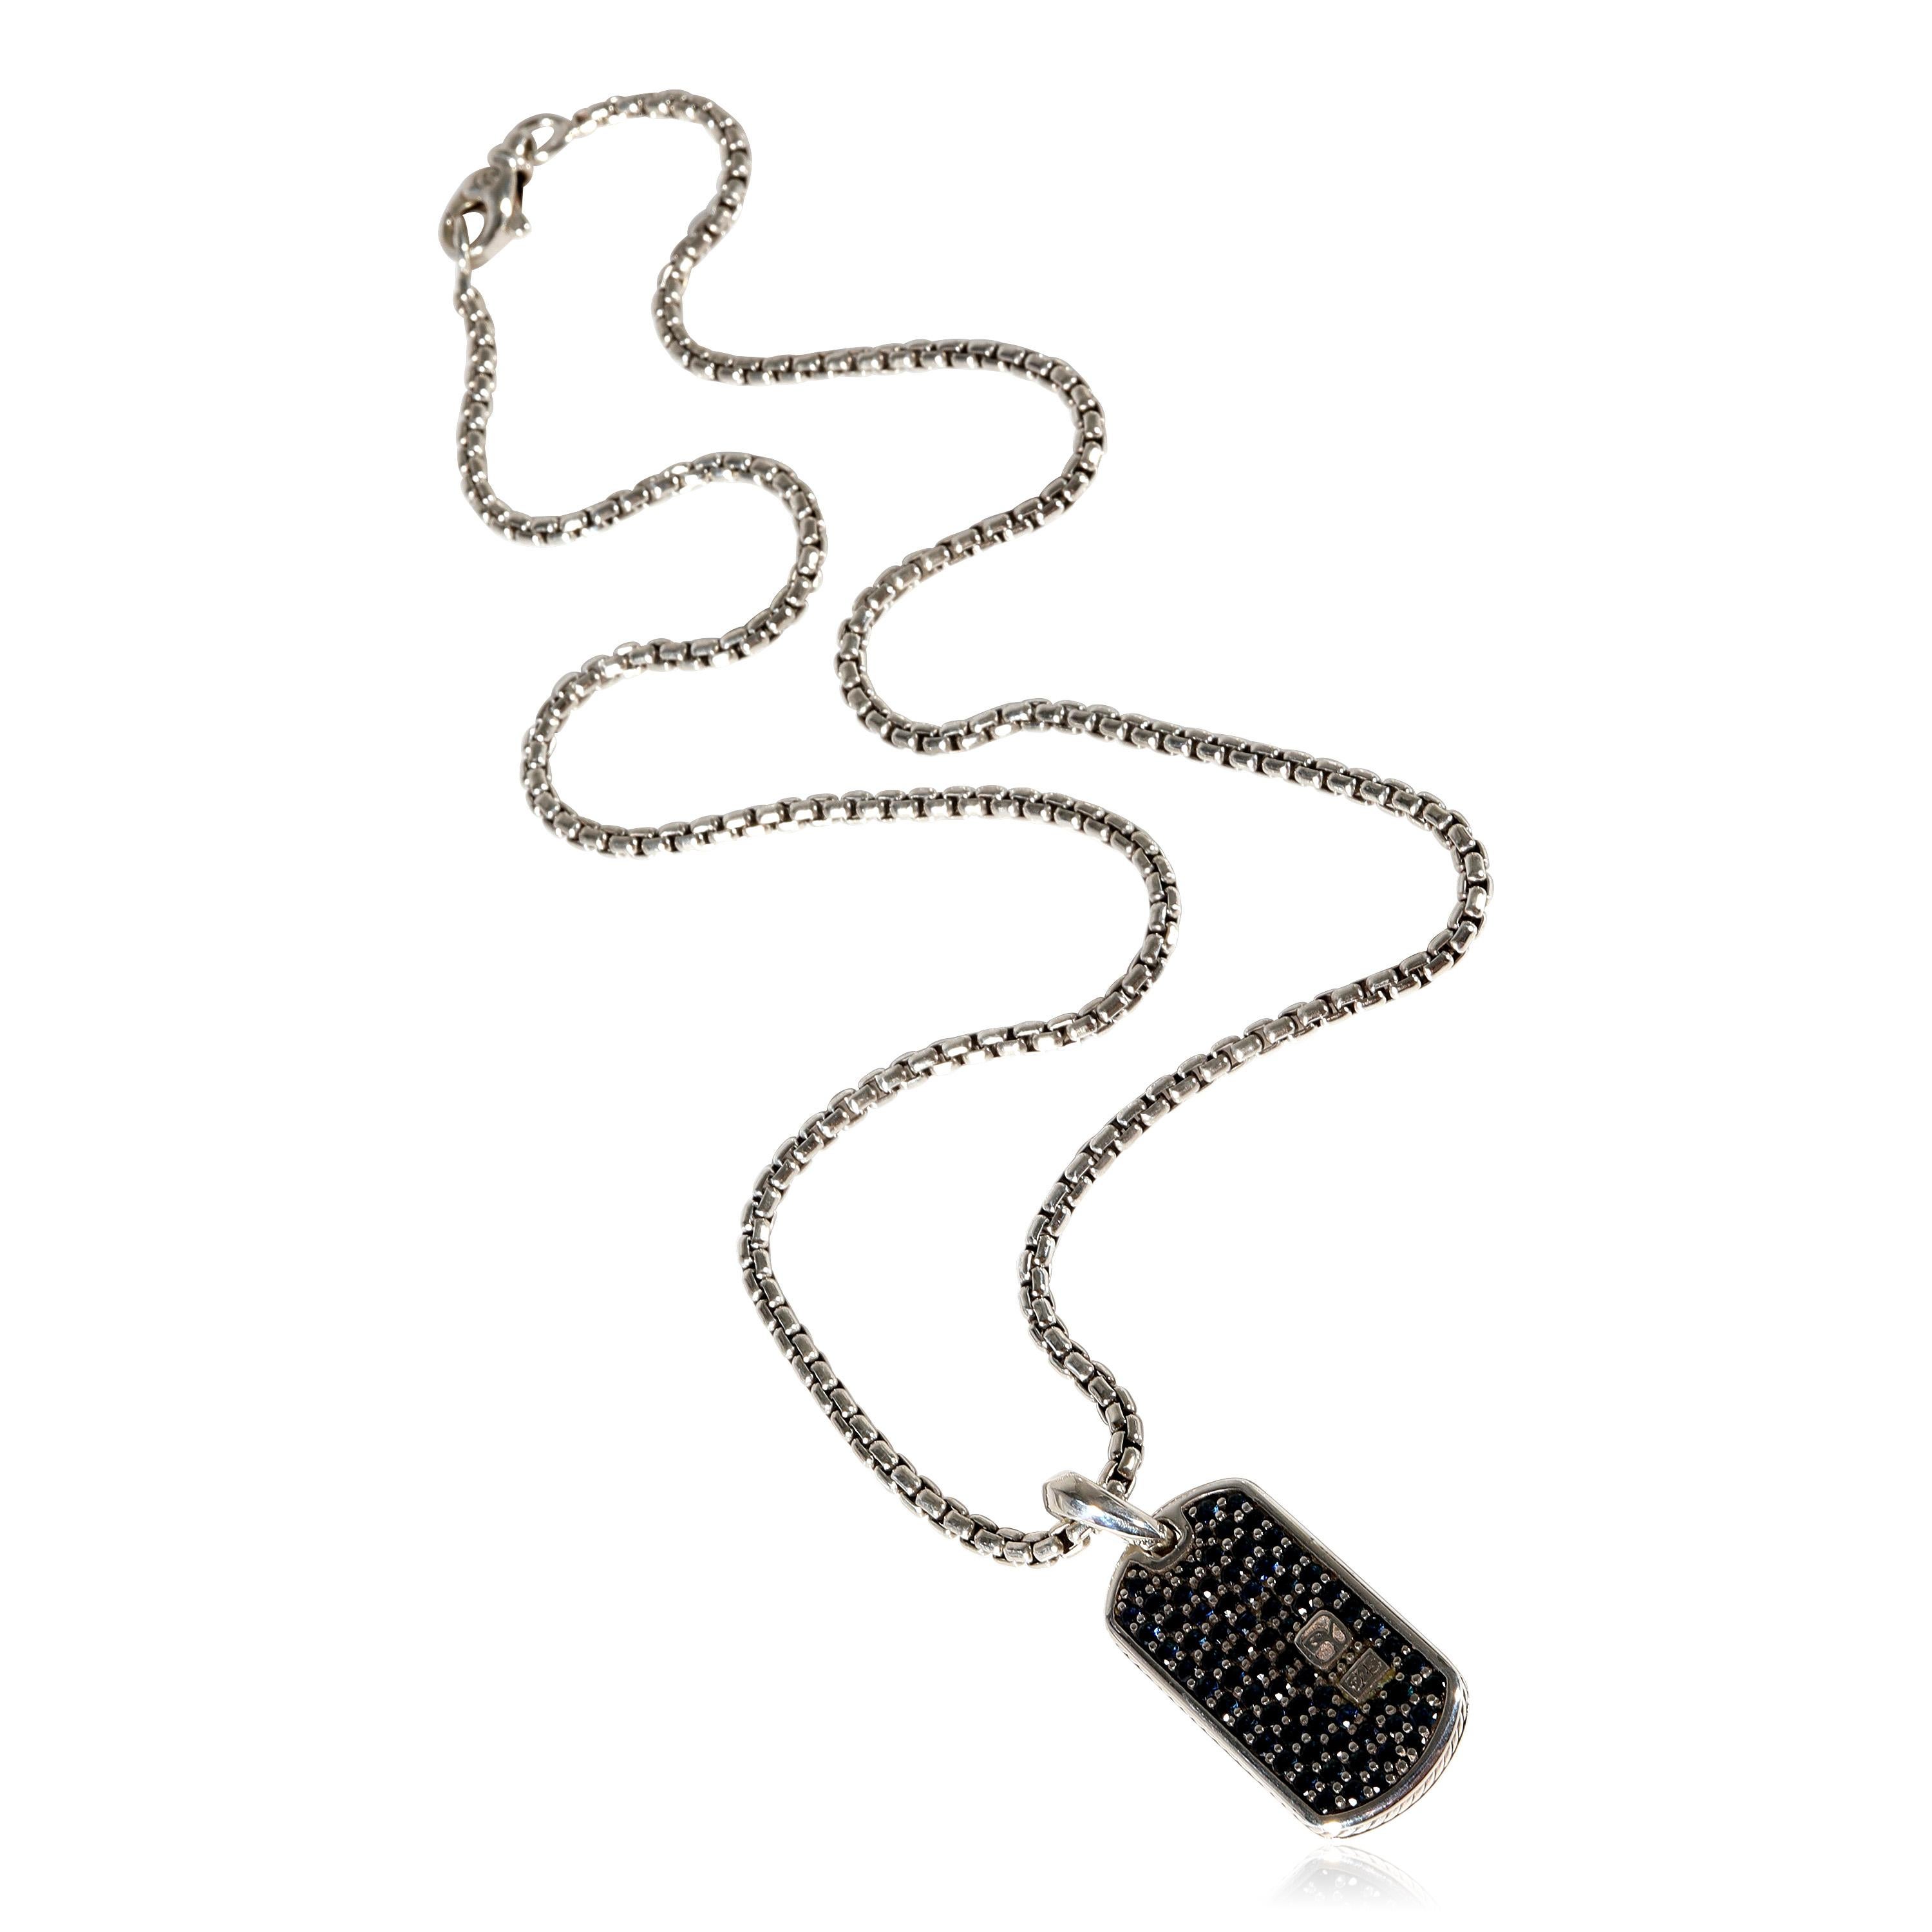 David Yurman Blue Sapphire Tag Pendant on 20 Inch Chain in Sterling Silver

PRIMARY DETAILS
SKU: 121242
Listing Title: David Yurman Blue Sapphire Tag Pendant on 20 Inch Chain in Sterling Silver
Condition Description: Retails for 2235 USD. In